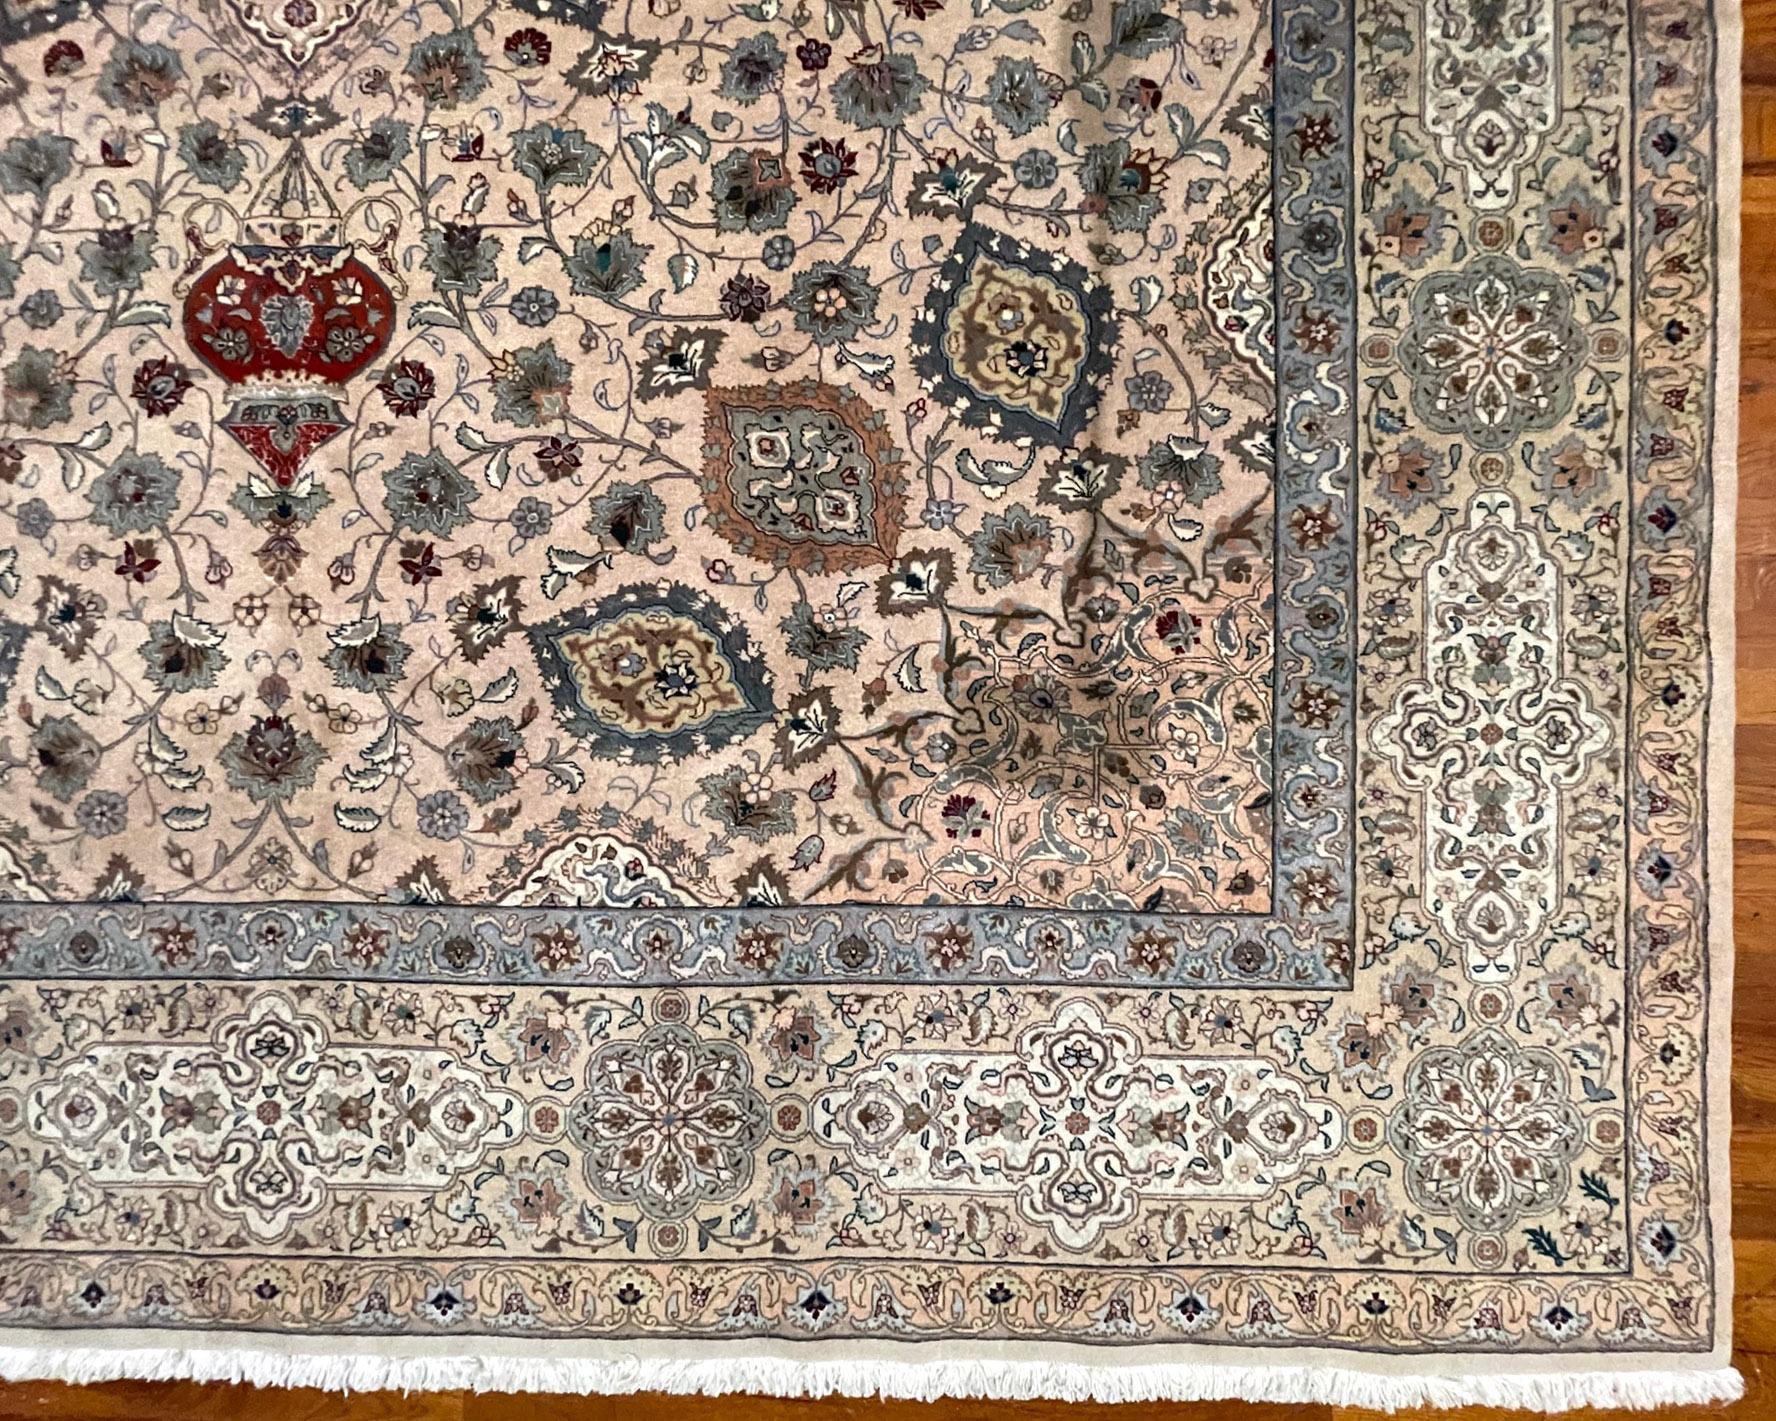 Authentic Persian Hand Knotted Floral Sheikh Safi Design Tabriz Rug, 1970 For Sale 4